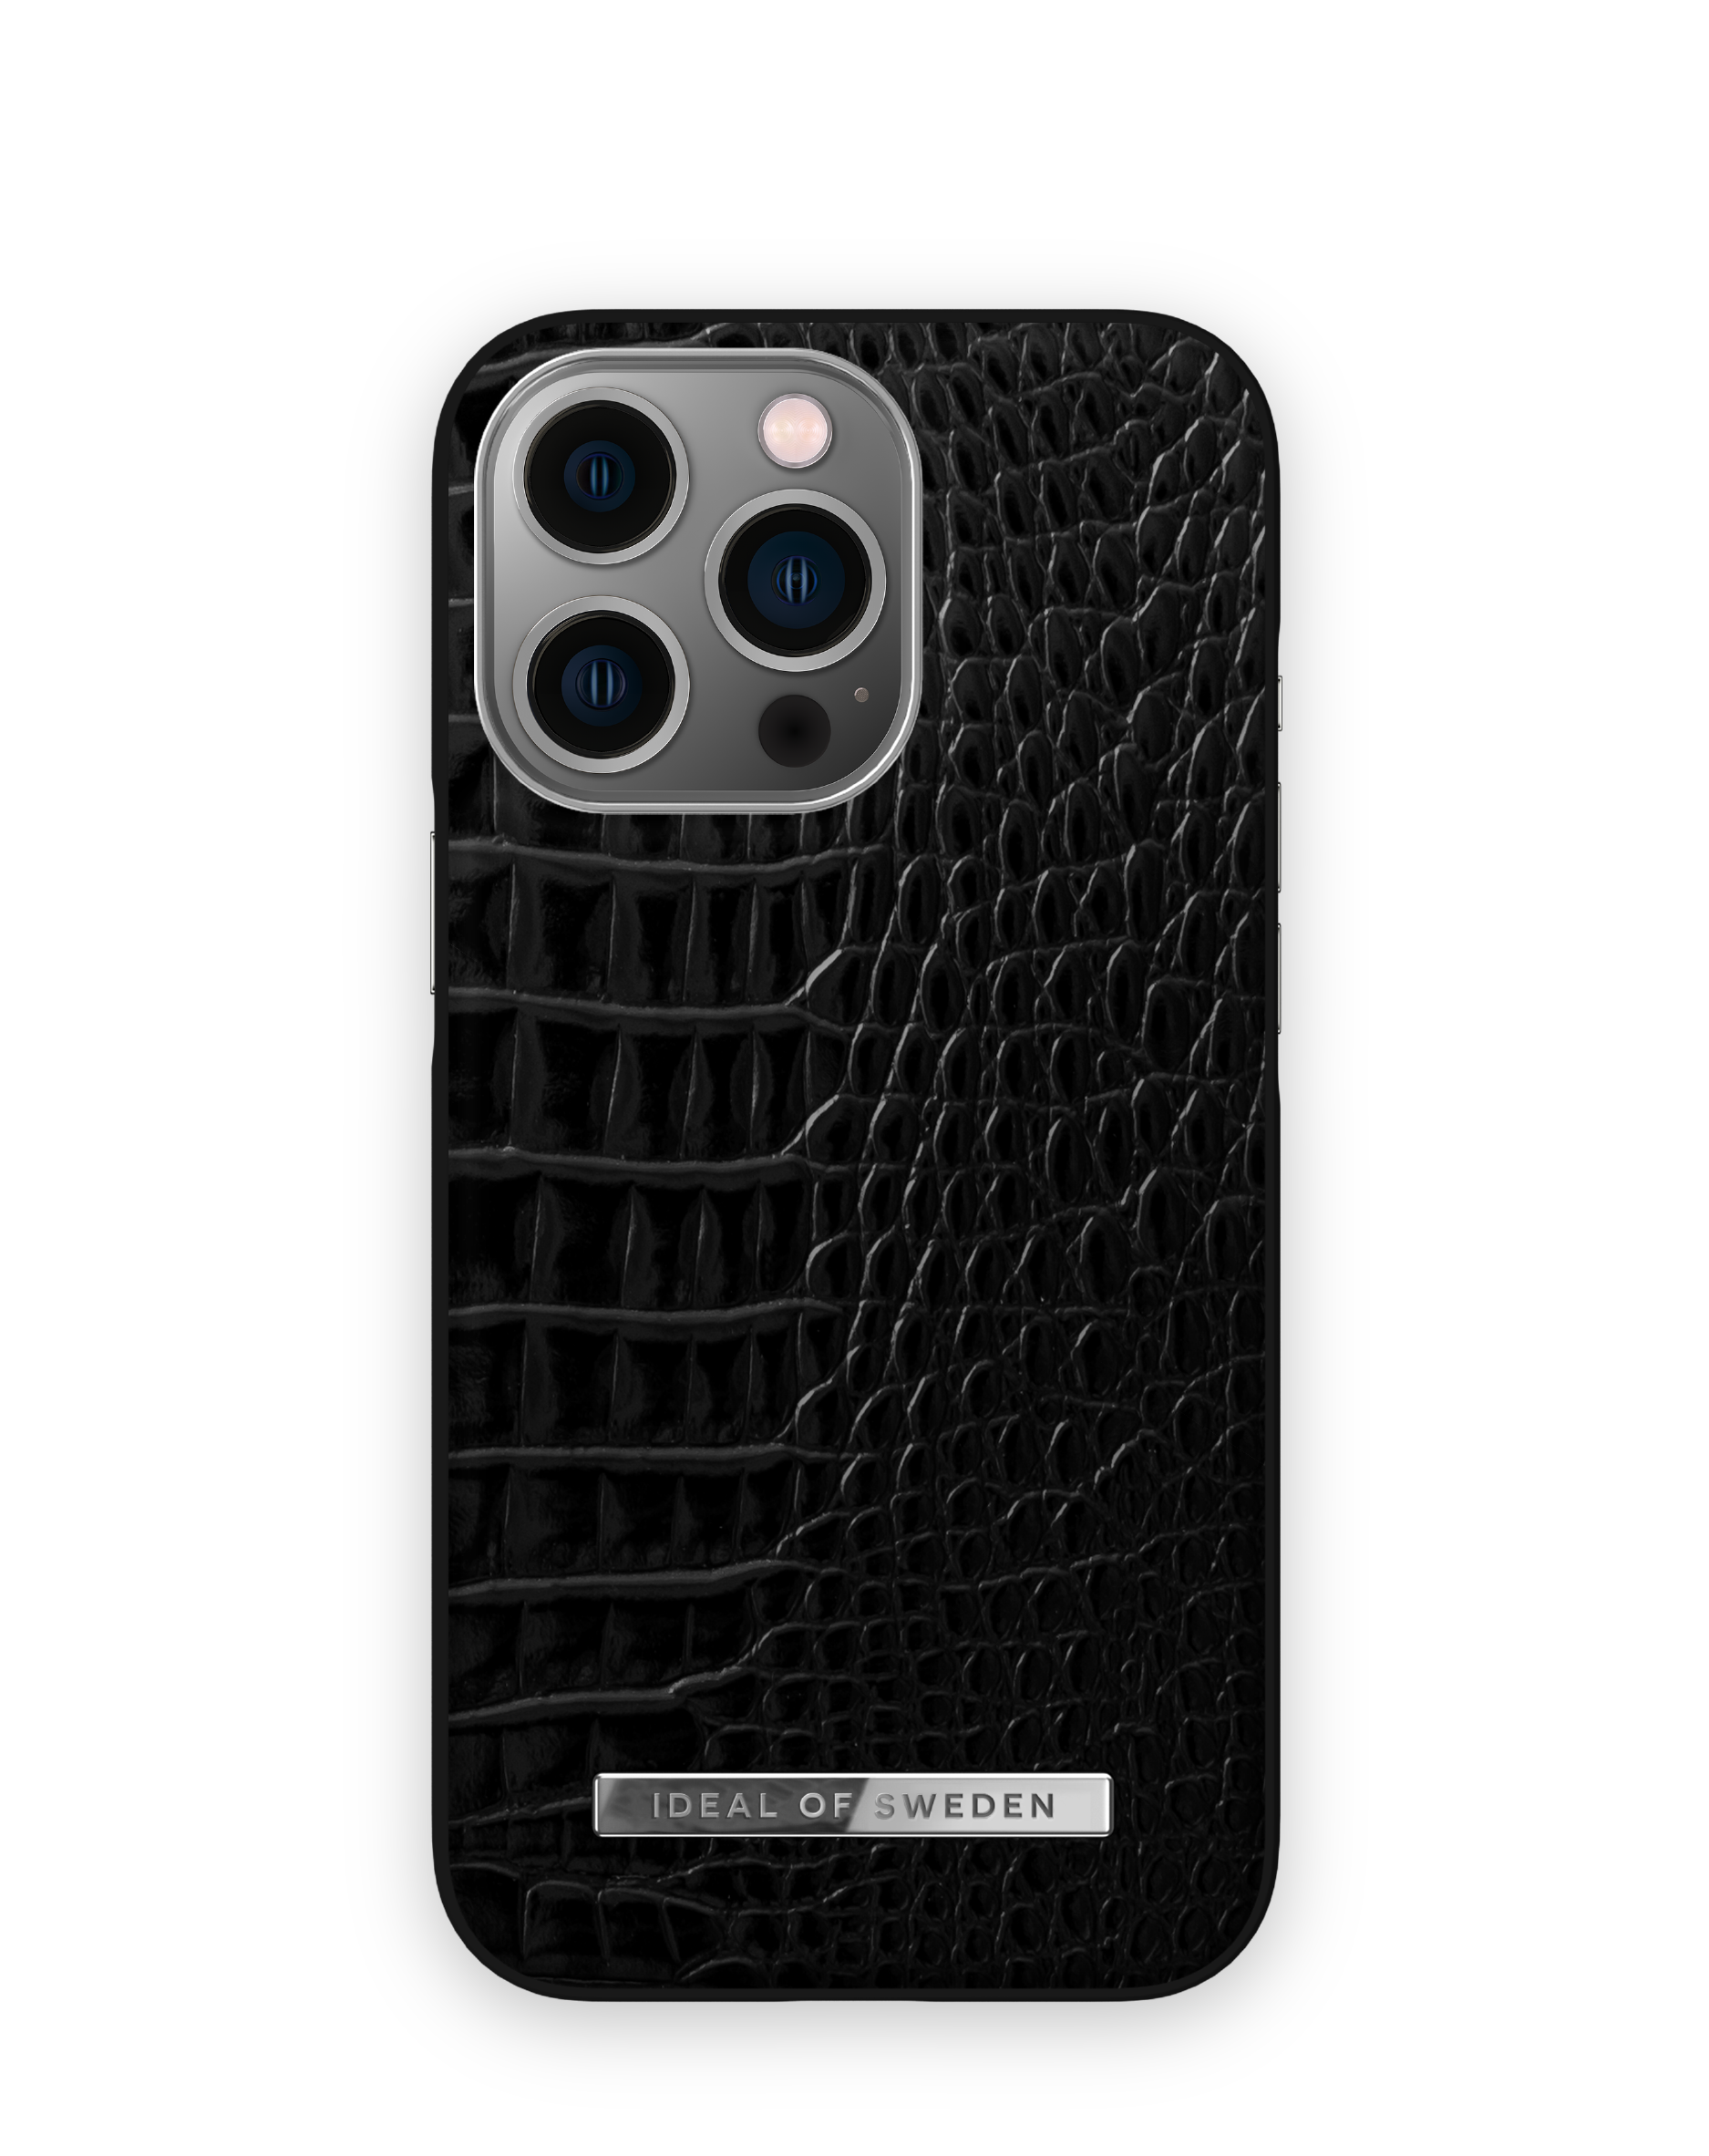 iPhone Backcover, Apple, Neo SWEDEN 13 Noir OF IDACSS21-I2161P-306, Silver Pro, IDEAL Croco